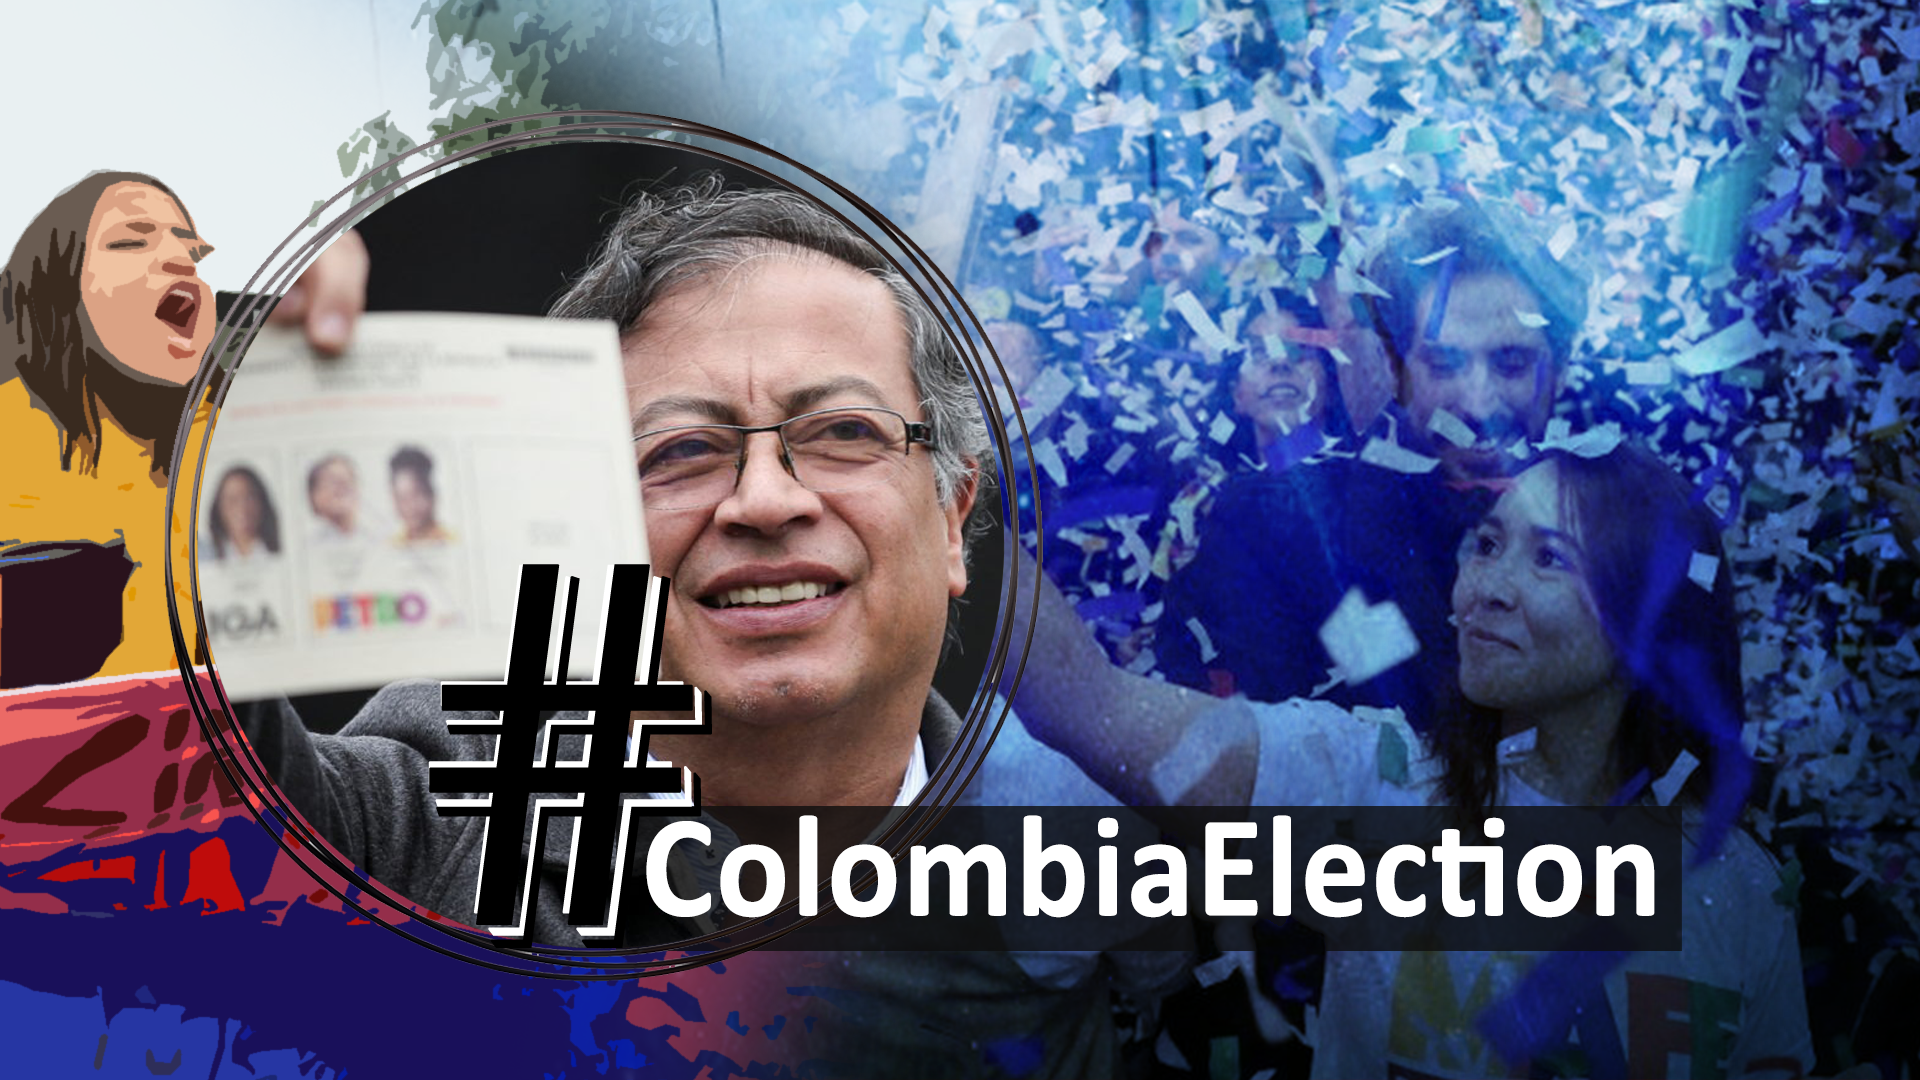 #ColombiaElection